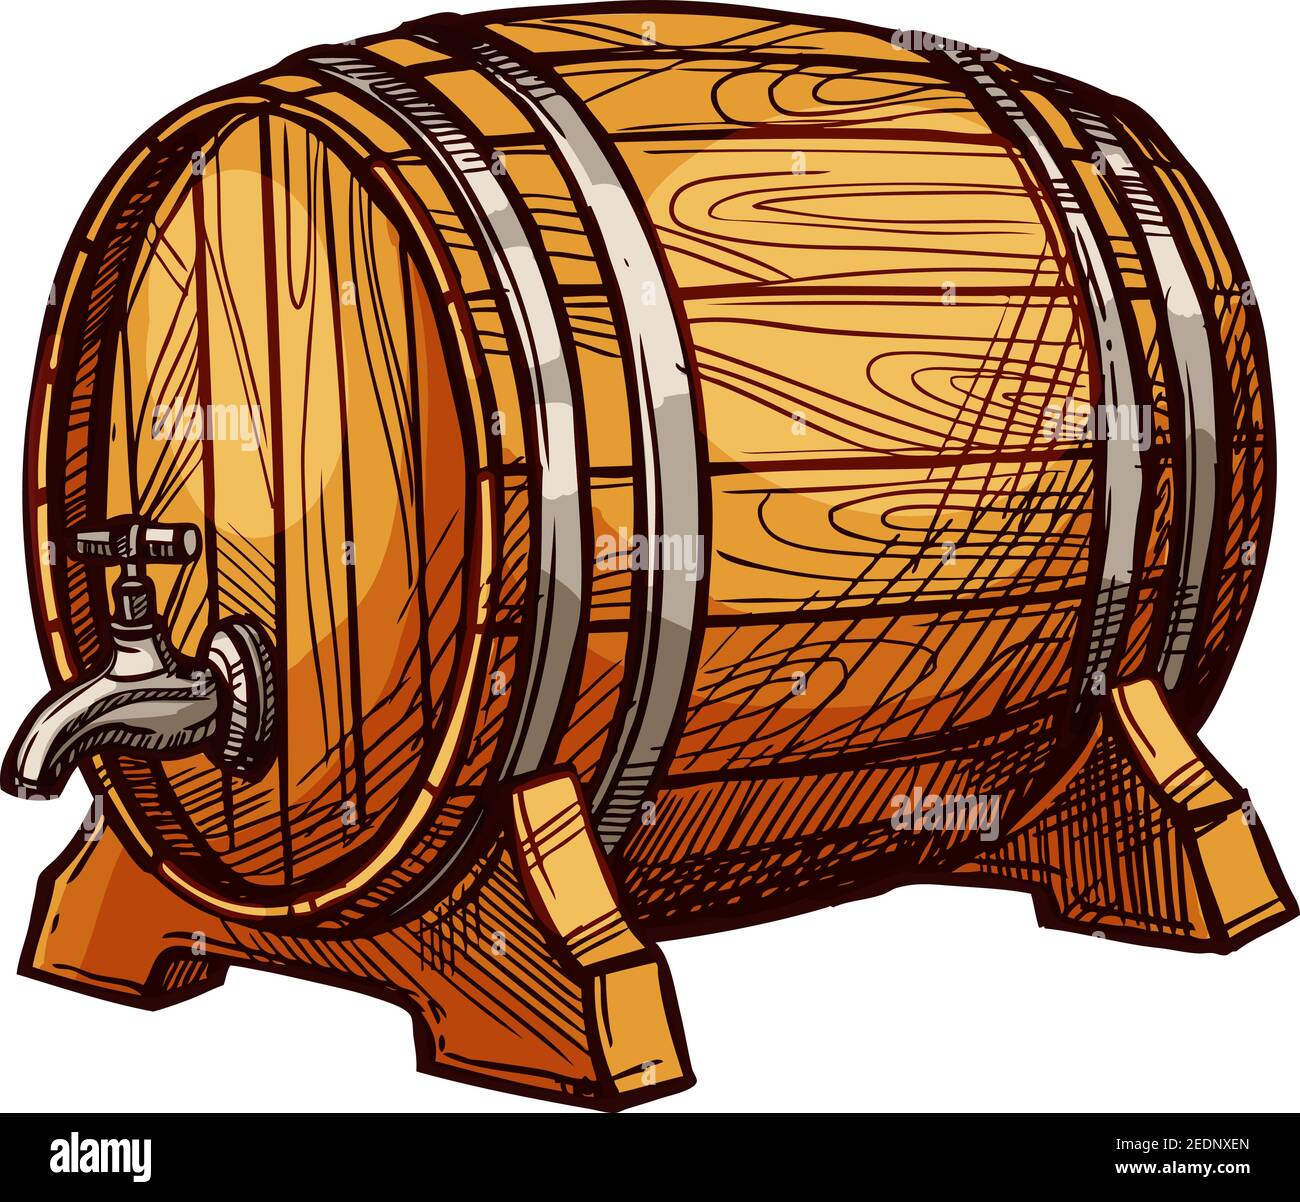 Wooden barrel of beer or wine sketch. Old oak keg with a tap on wood stand. Bar, pub, winery or brewery symbol, alcoholic drinks design Stock Vector